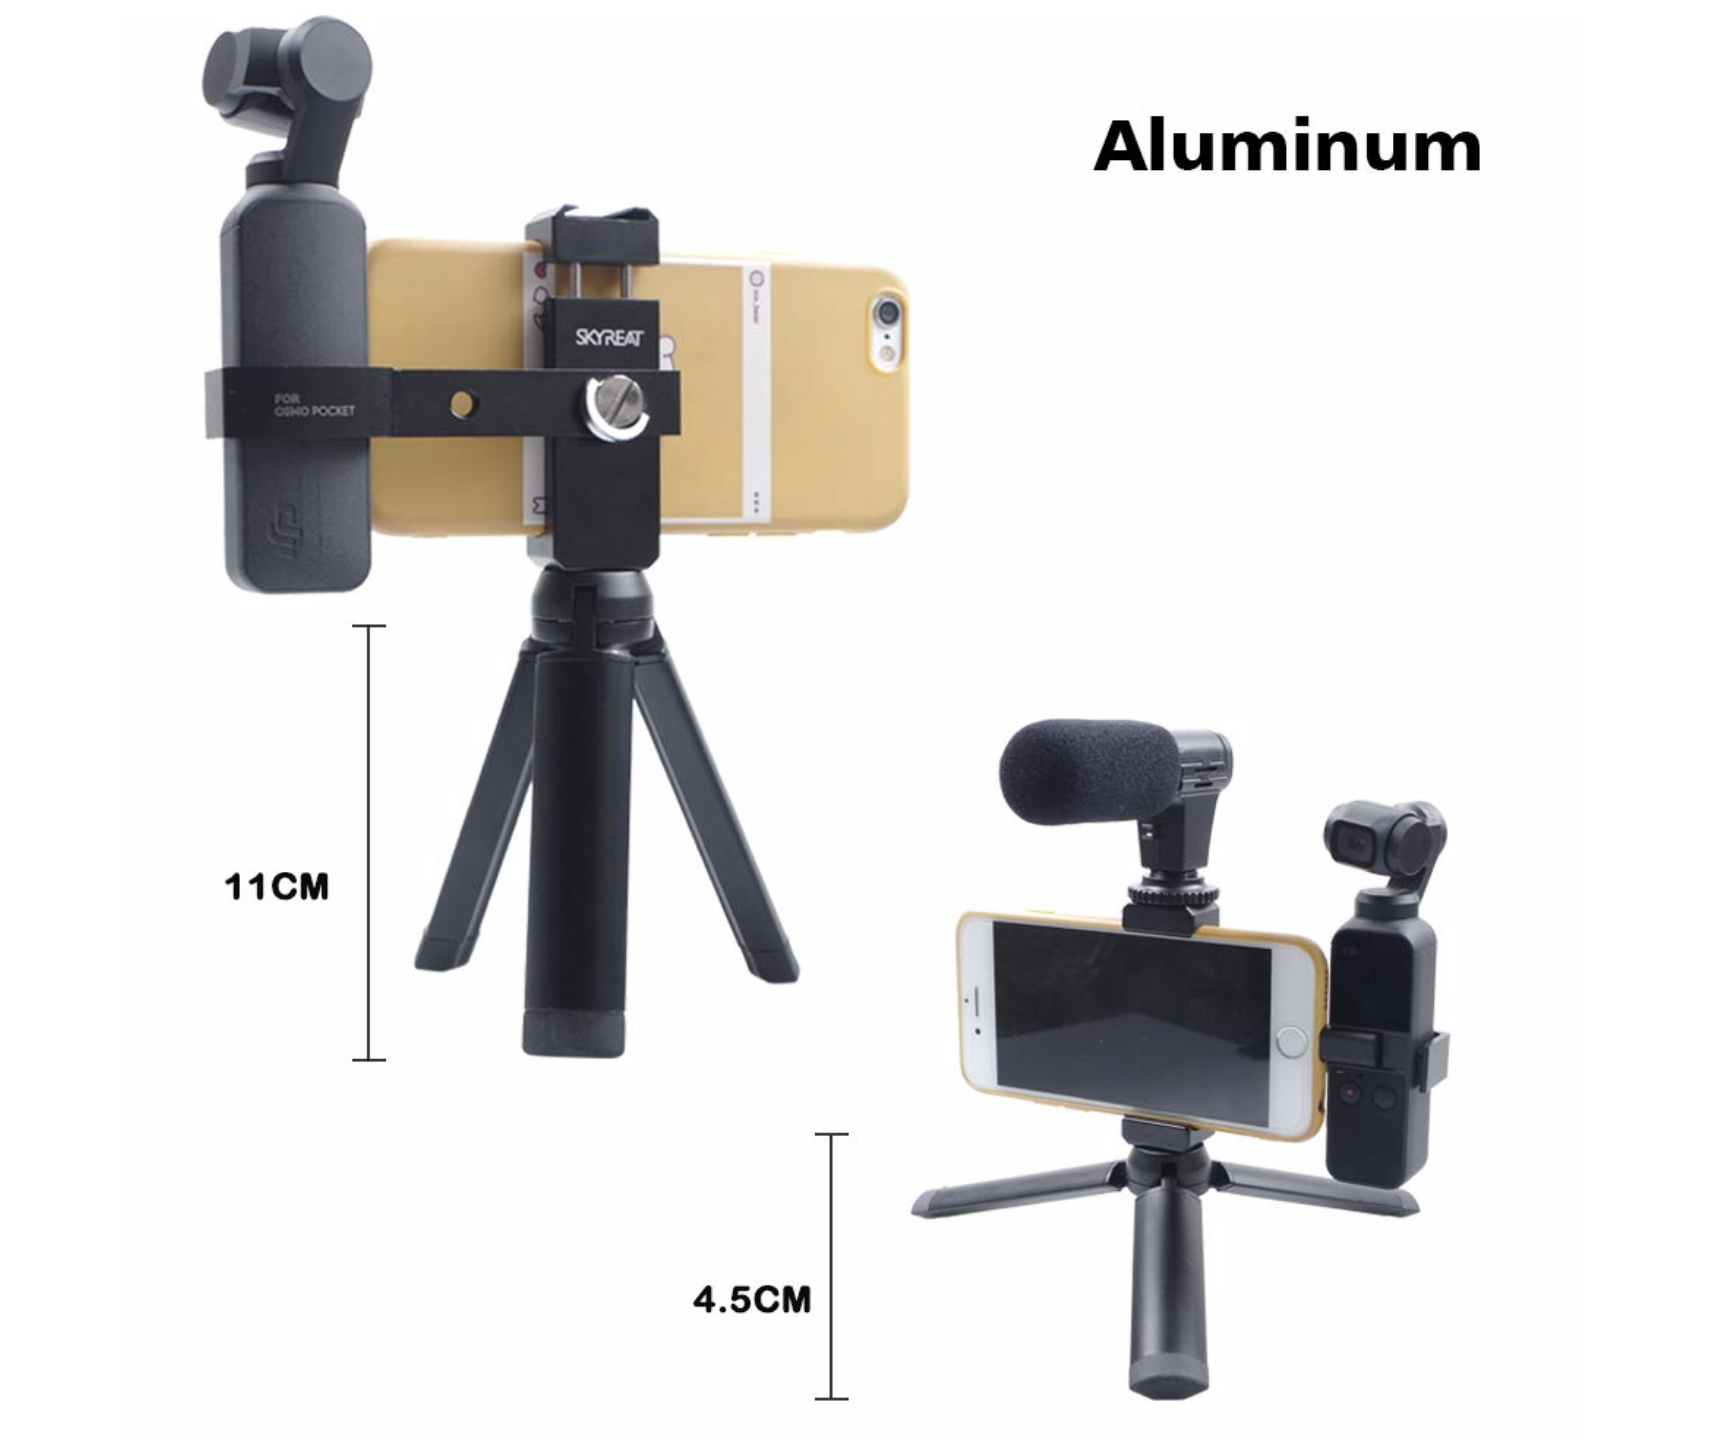 Stand for DJI Osmo,Aluminum Handheld Phone Holder Tripod Mount Stand for DJI Osmo Pocket Accessories 